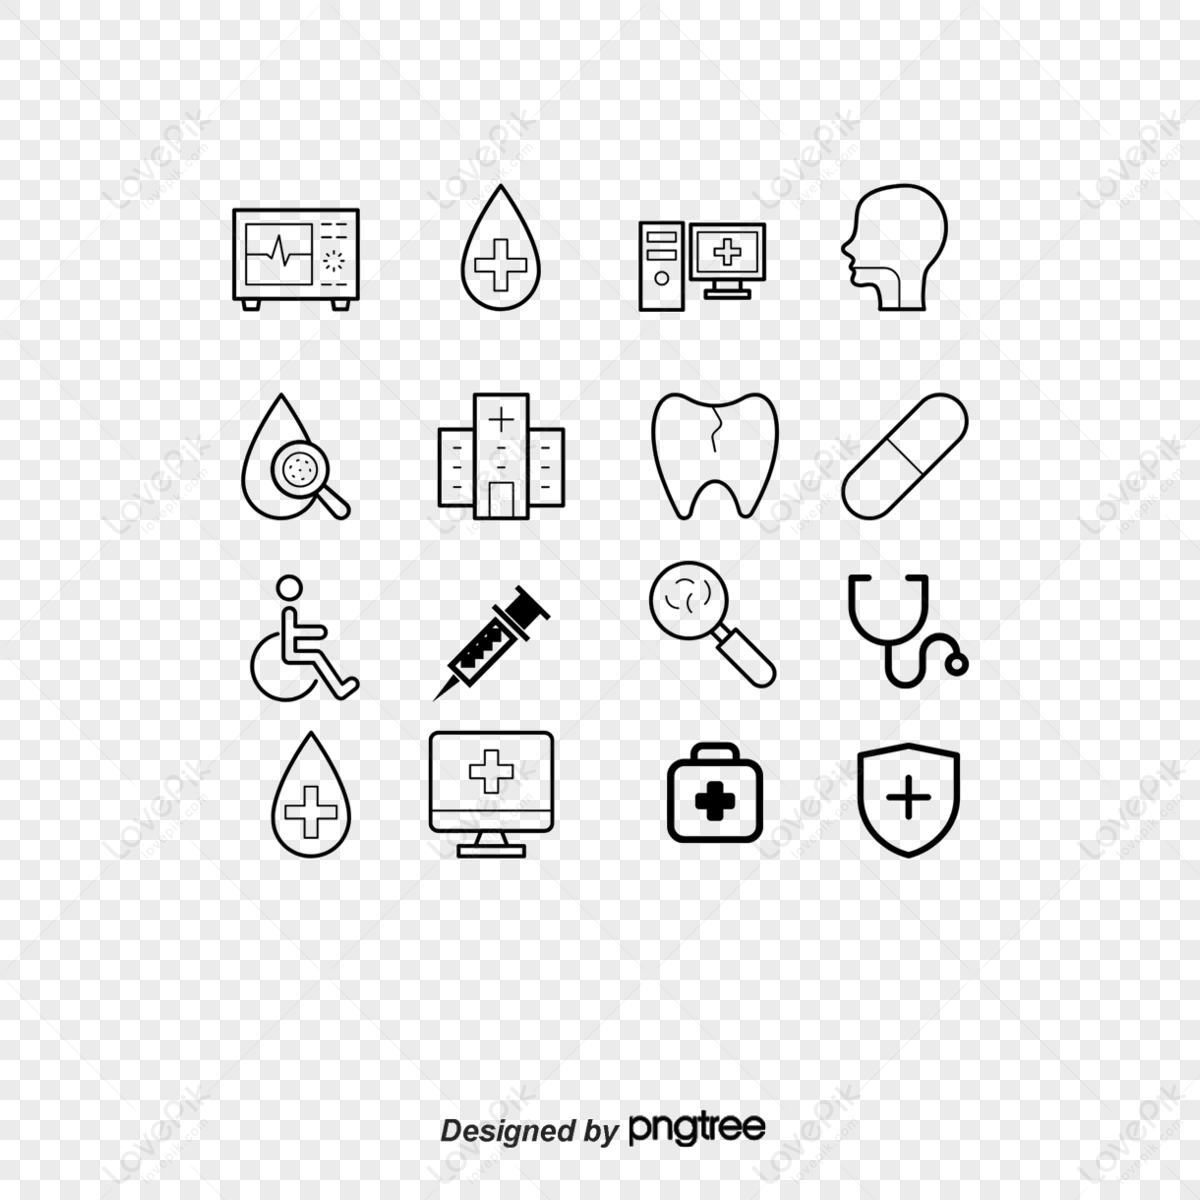 Gif Icon PNG Images, Vectors Free Download - Pngtree